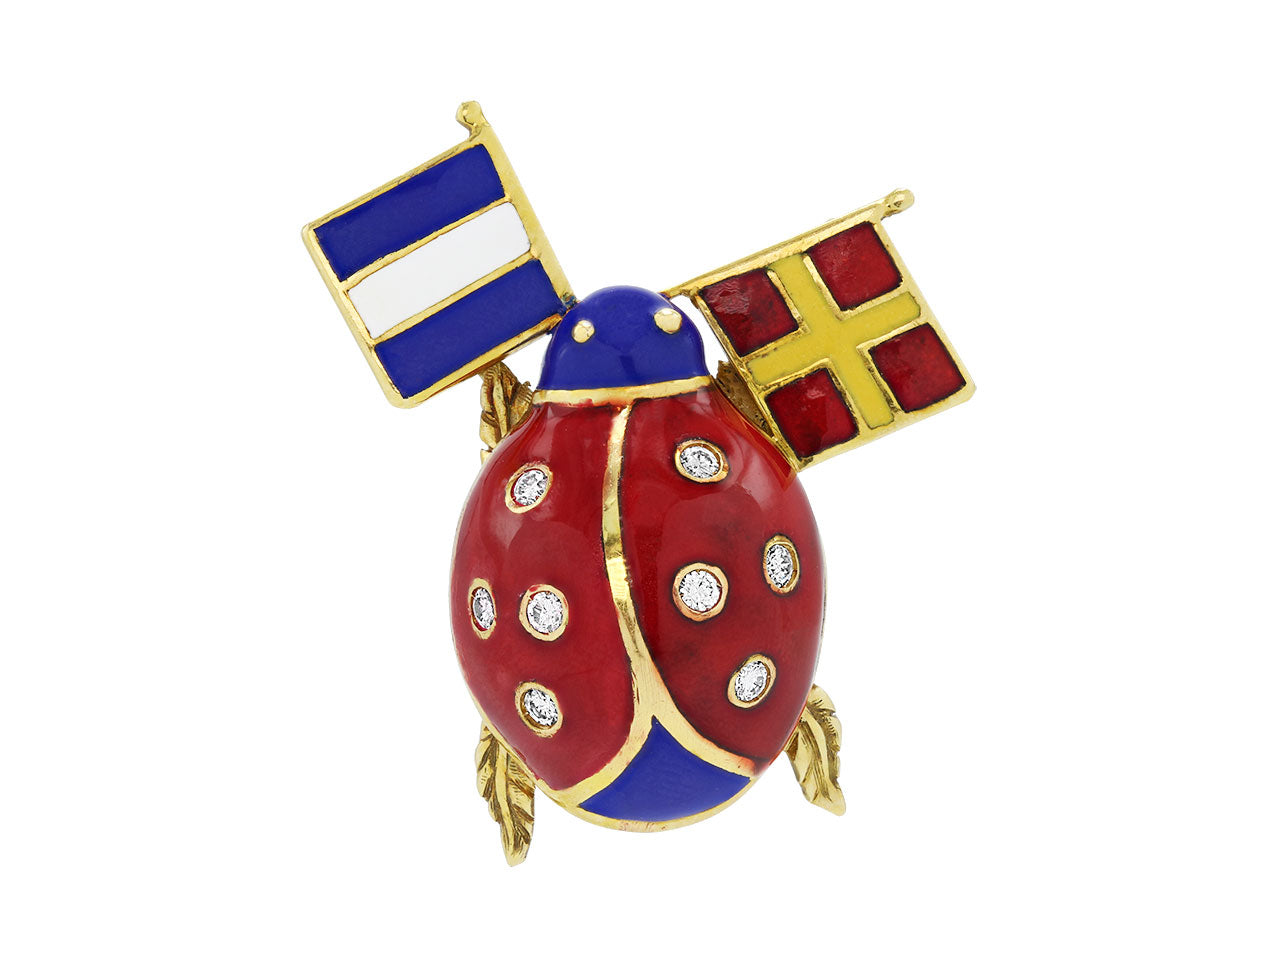 Diamond and Enameled Ladybug Brooch with Flags in 18K Gold